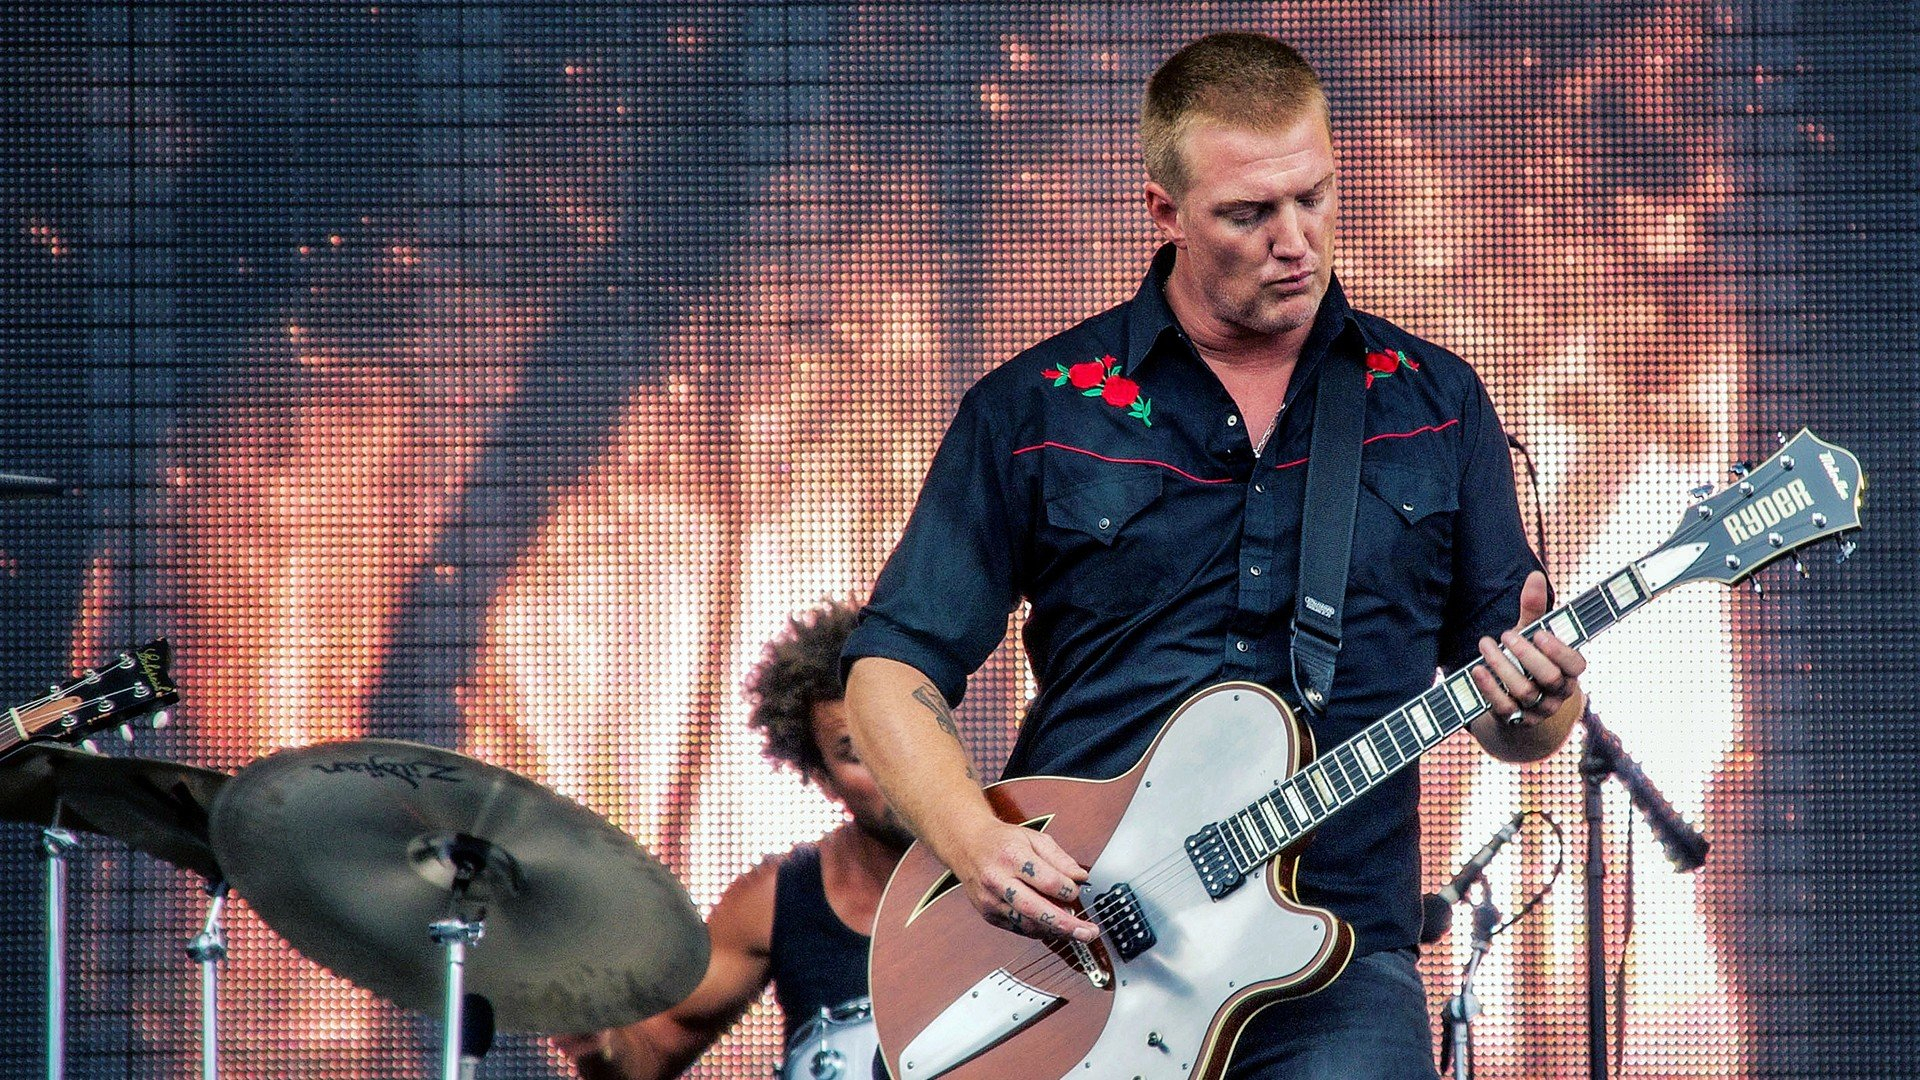 1920x1080 Music Queens of the Stone Age guitars drum set band concert josh homme jon theodore wallpaper | | 234887